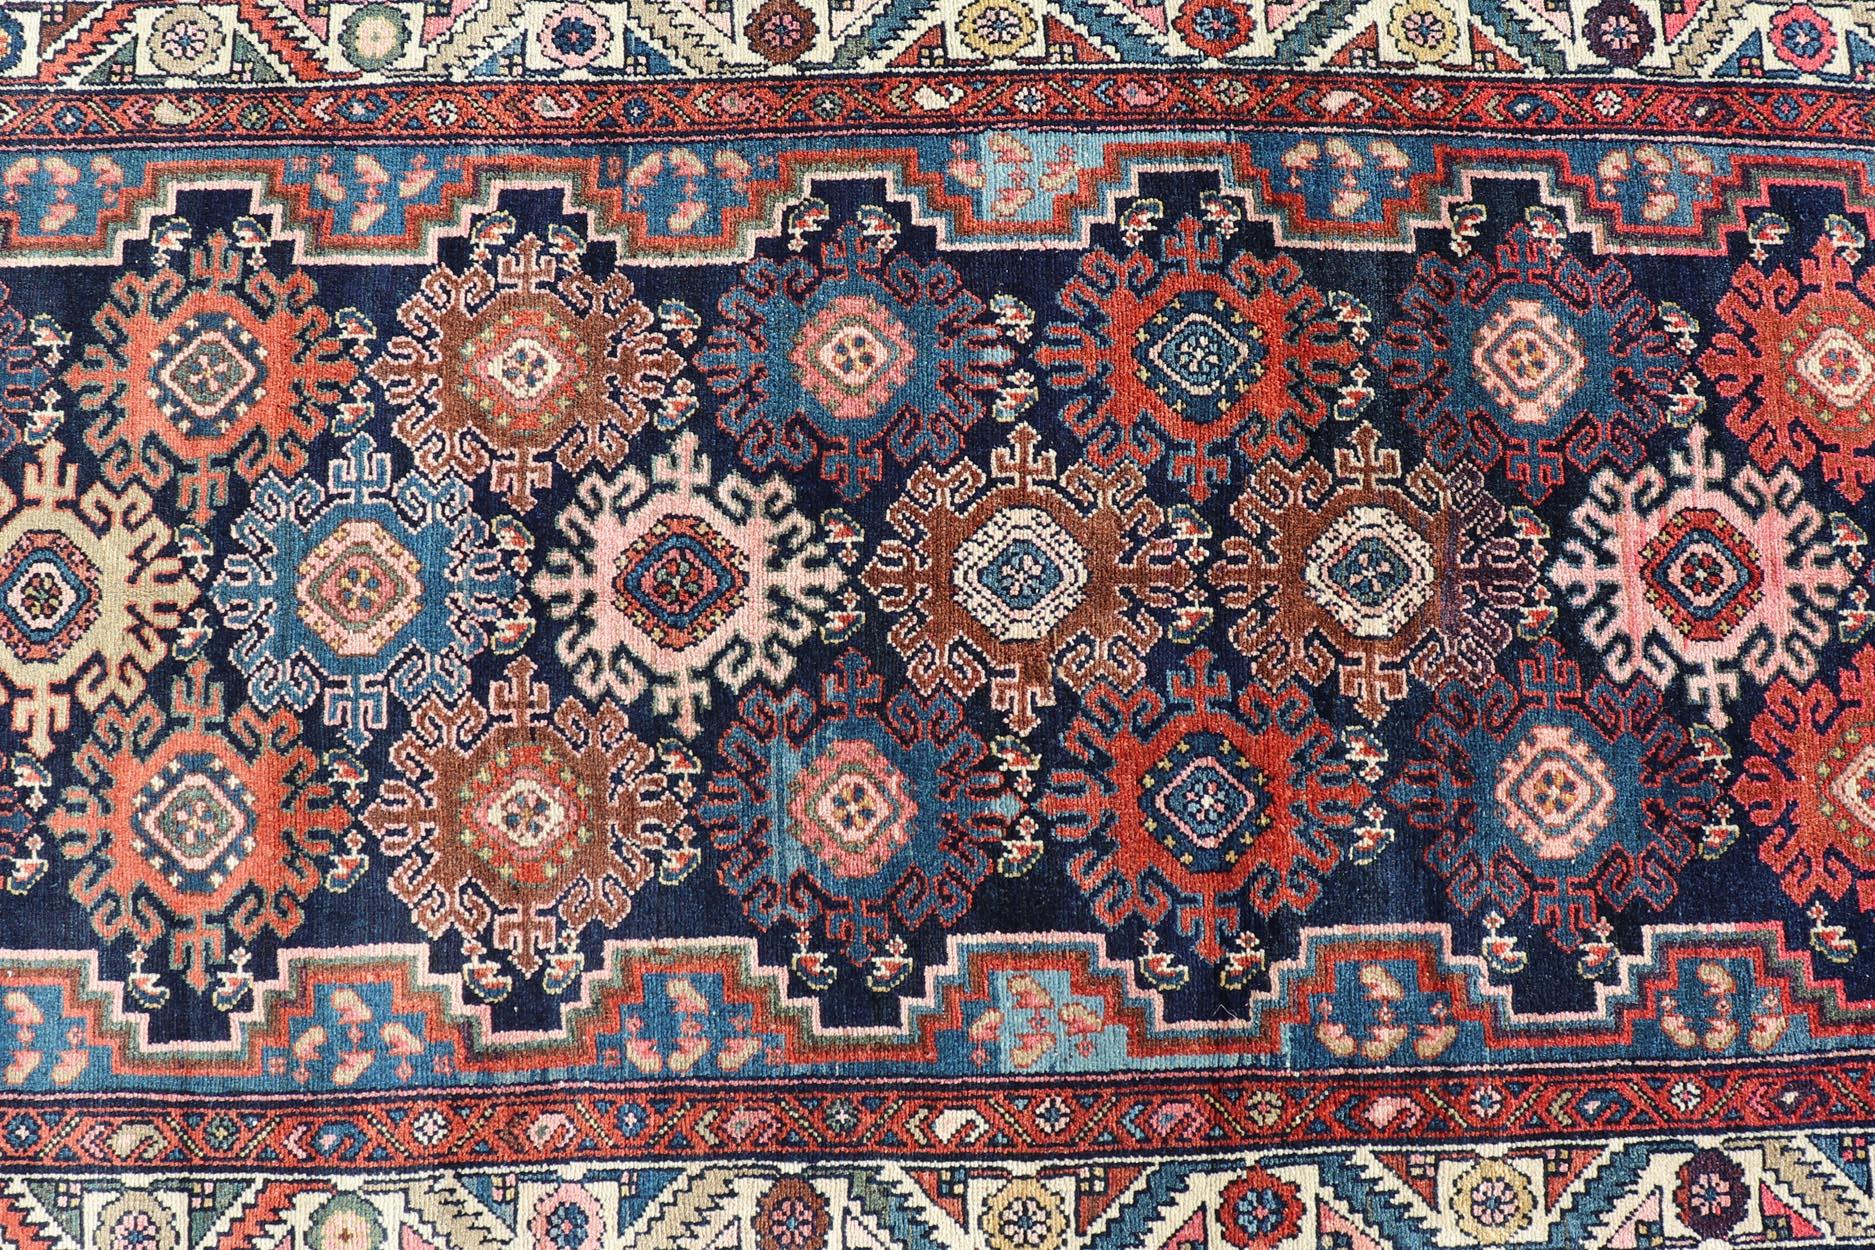 Malayer Antique Persian Hamadan Runner with All-Over Geometric Motifs In Jewel Tones For Sale